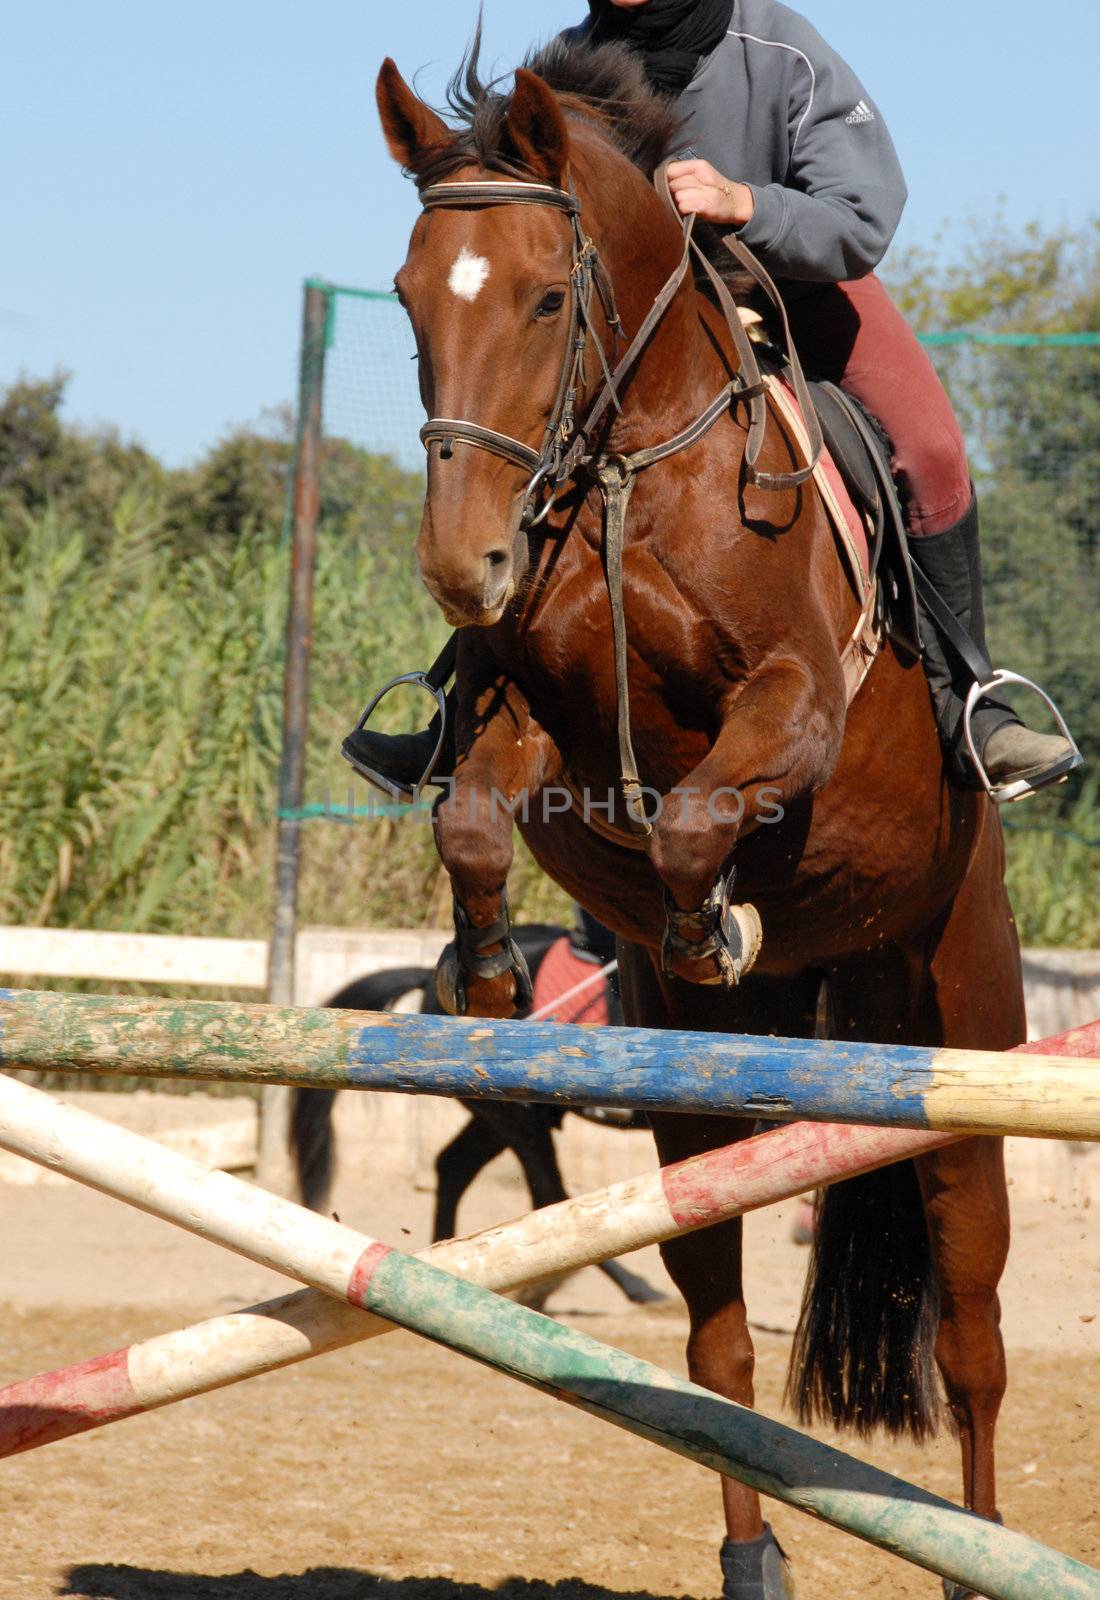 beautiful brown horse jumping in a training of competition

